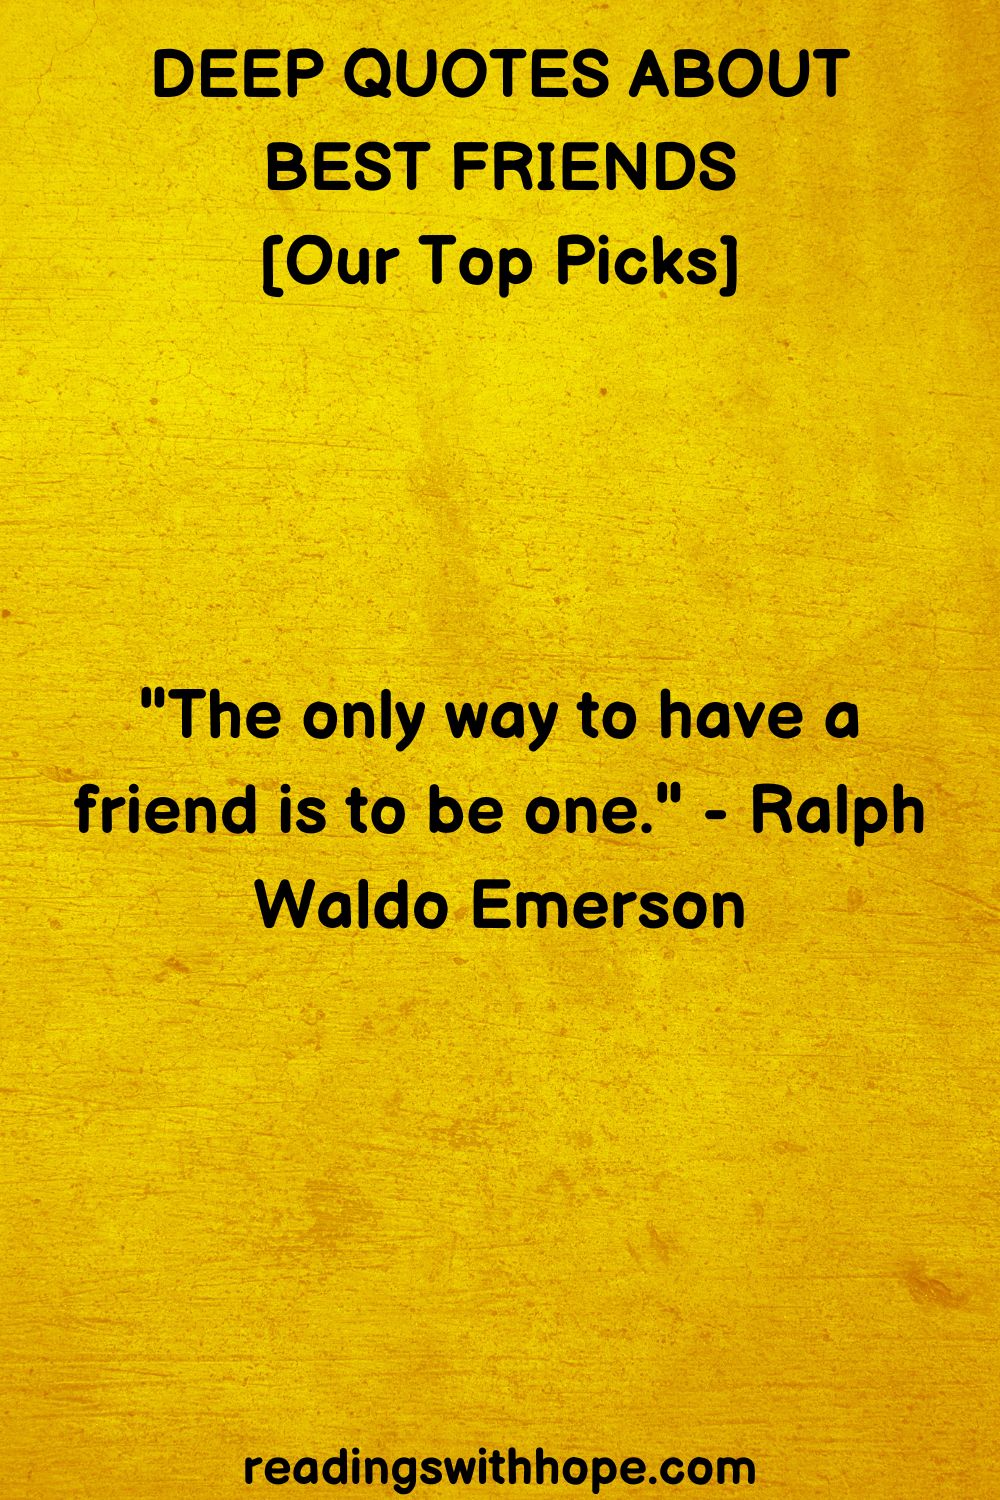 deep quotes about best friends